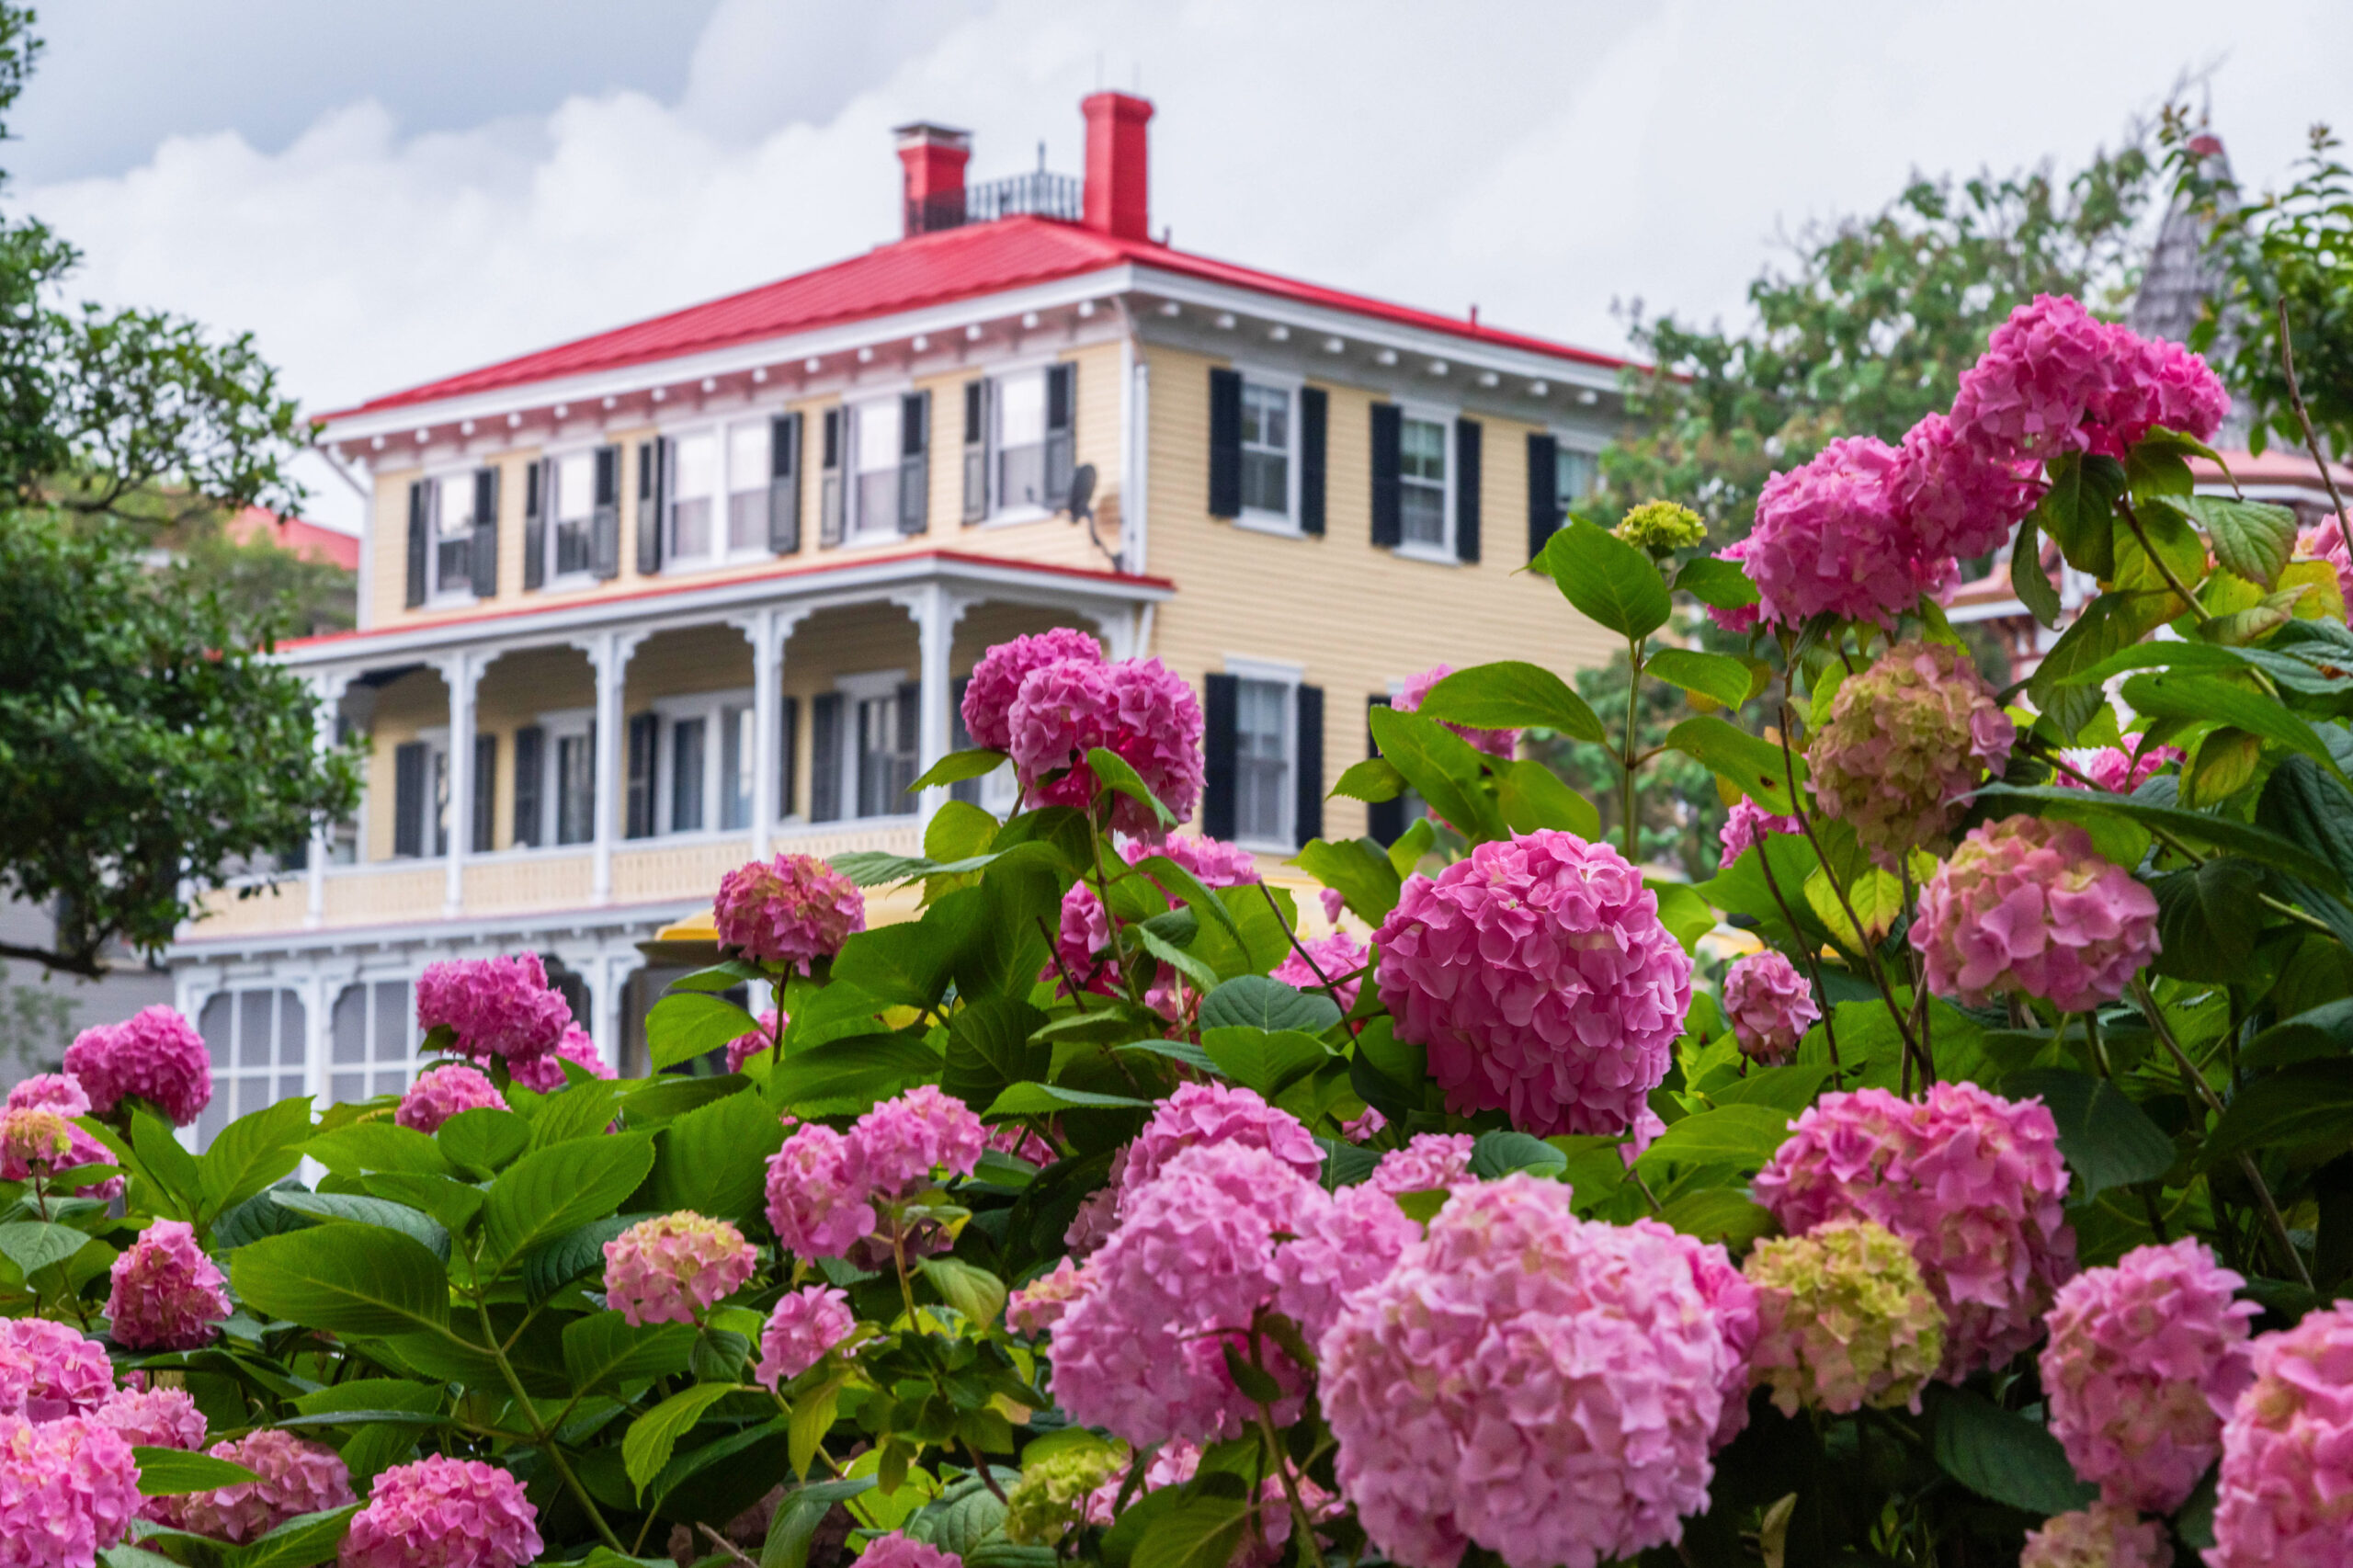 Pink hydrangea in front of a yellow and red Victorian style house